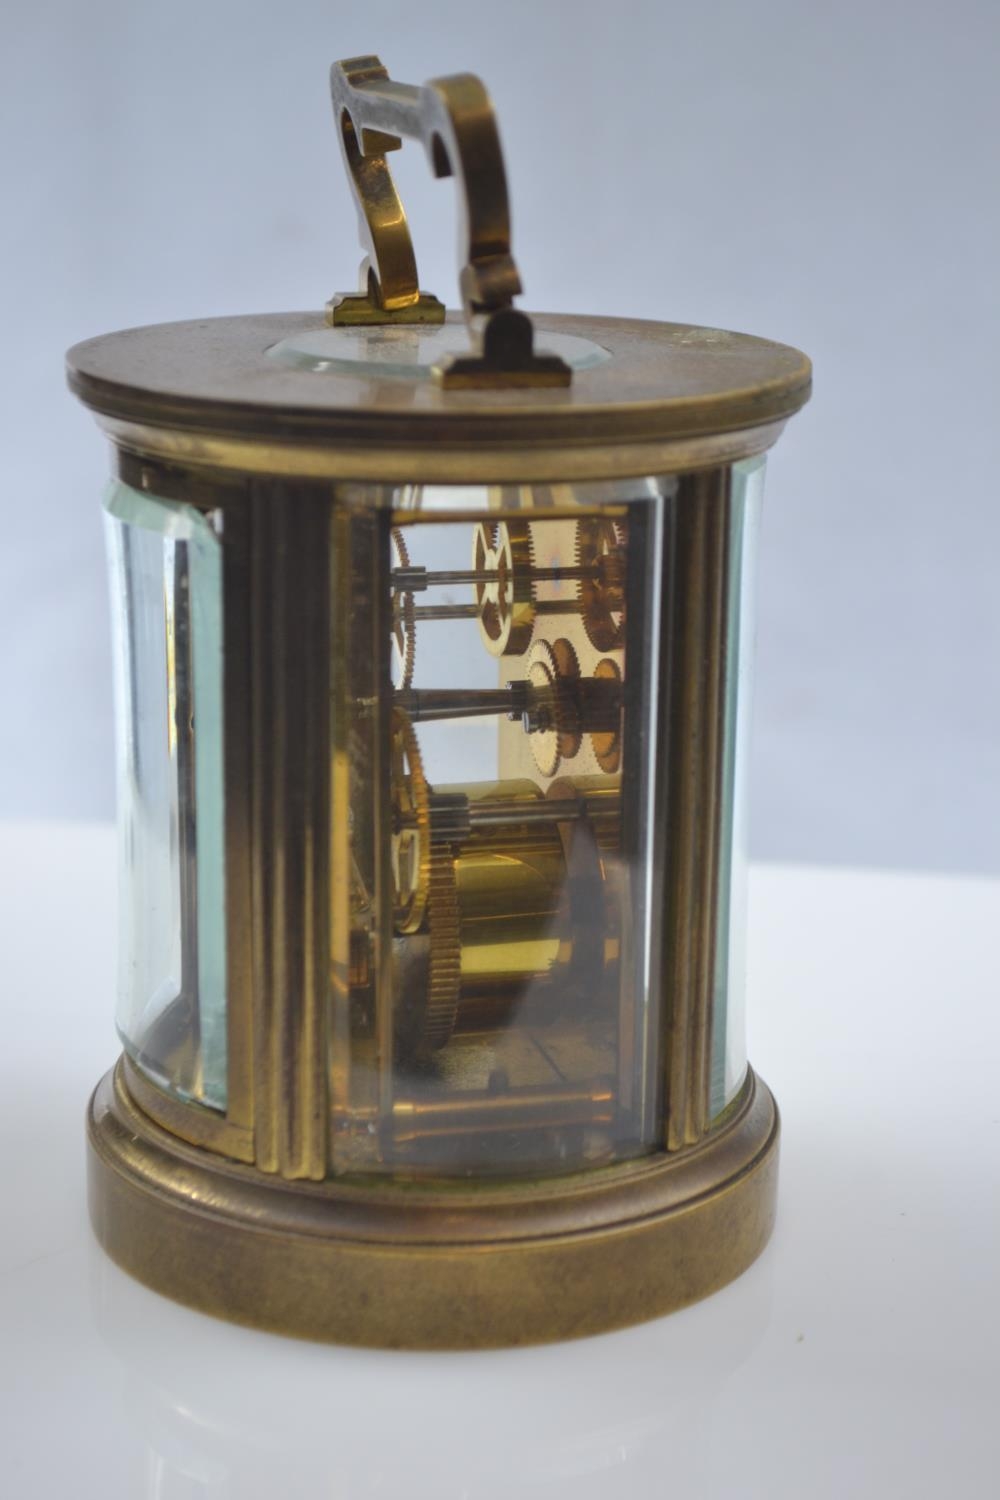 Brass and glass cylindrical carriage clock by the Chester Carriage Clock Company, dia. 9.5 x H15cm - Image 4 of 7